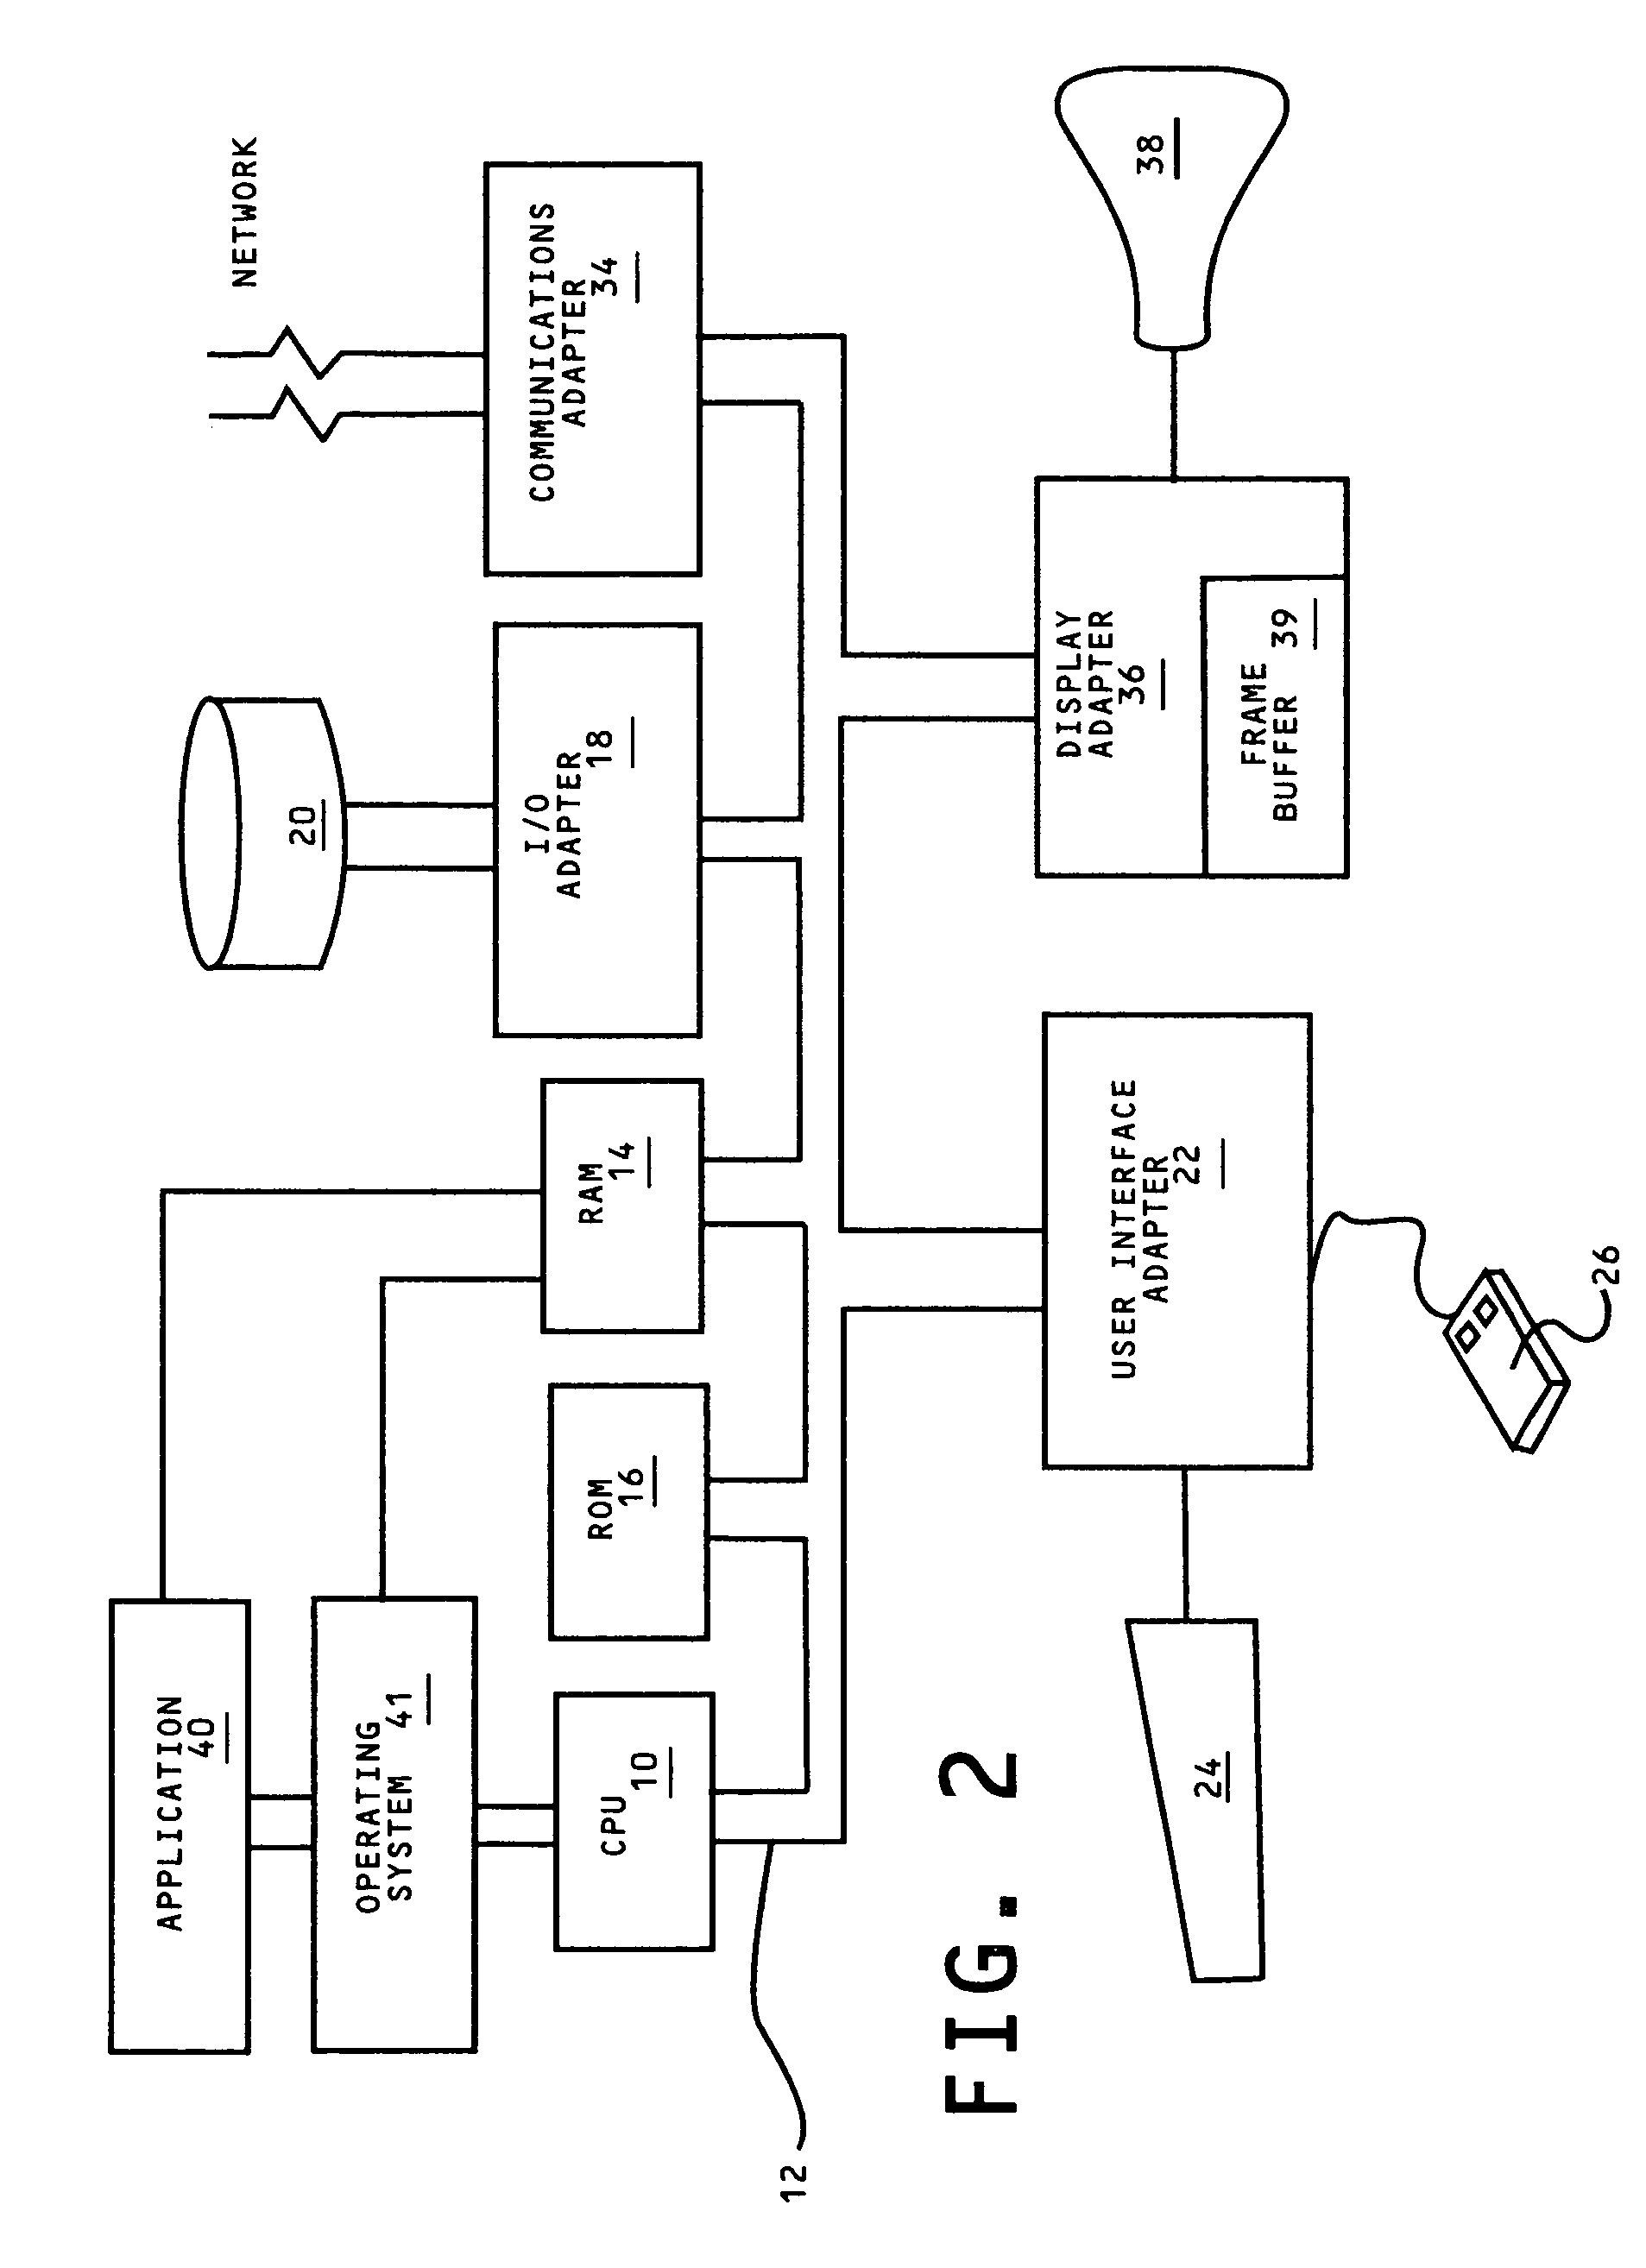 Electronic mail distribution network with simple user-friendly interactive implementation enabling a user at a receiving display terminal to turn off spam